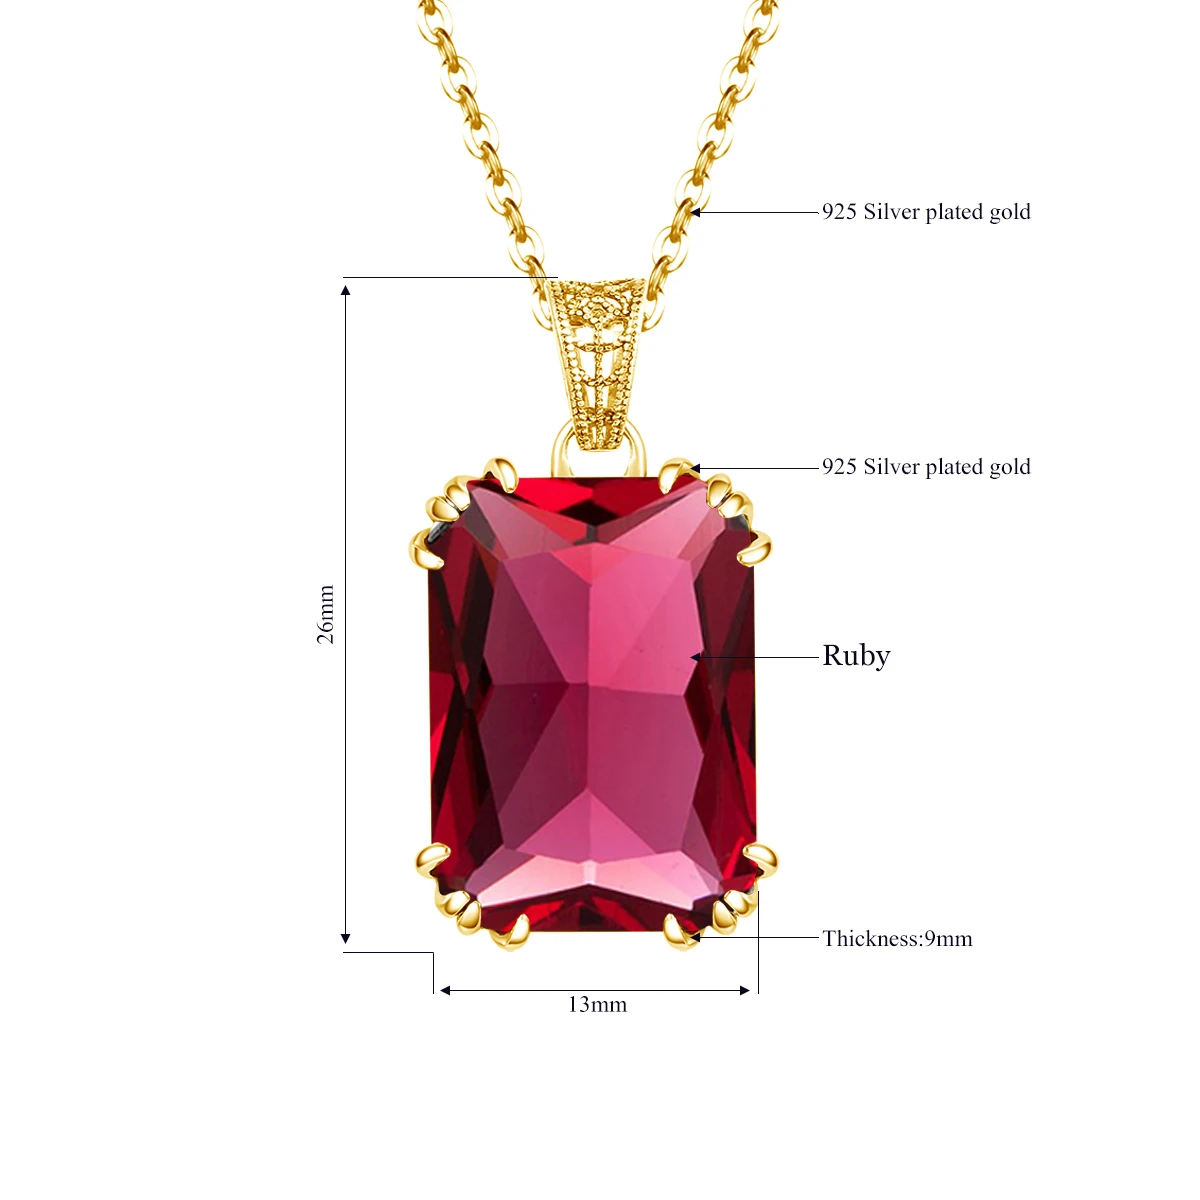 Designer 925 Sterling silver Ladies Pendant Sapphire Ruby Emerald Necklace Gift 